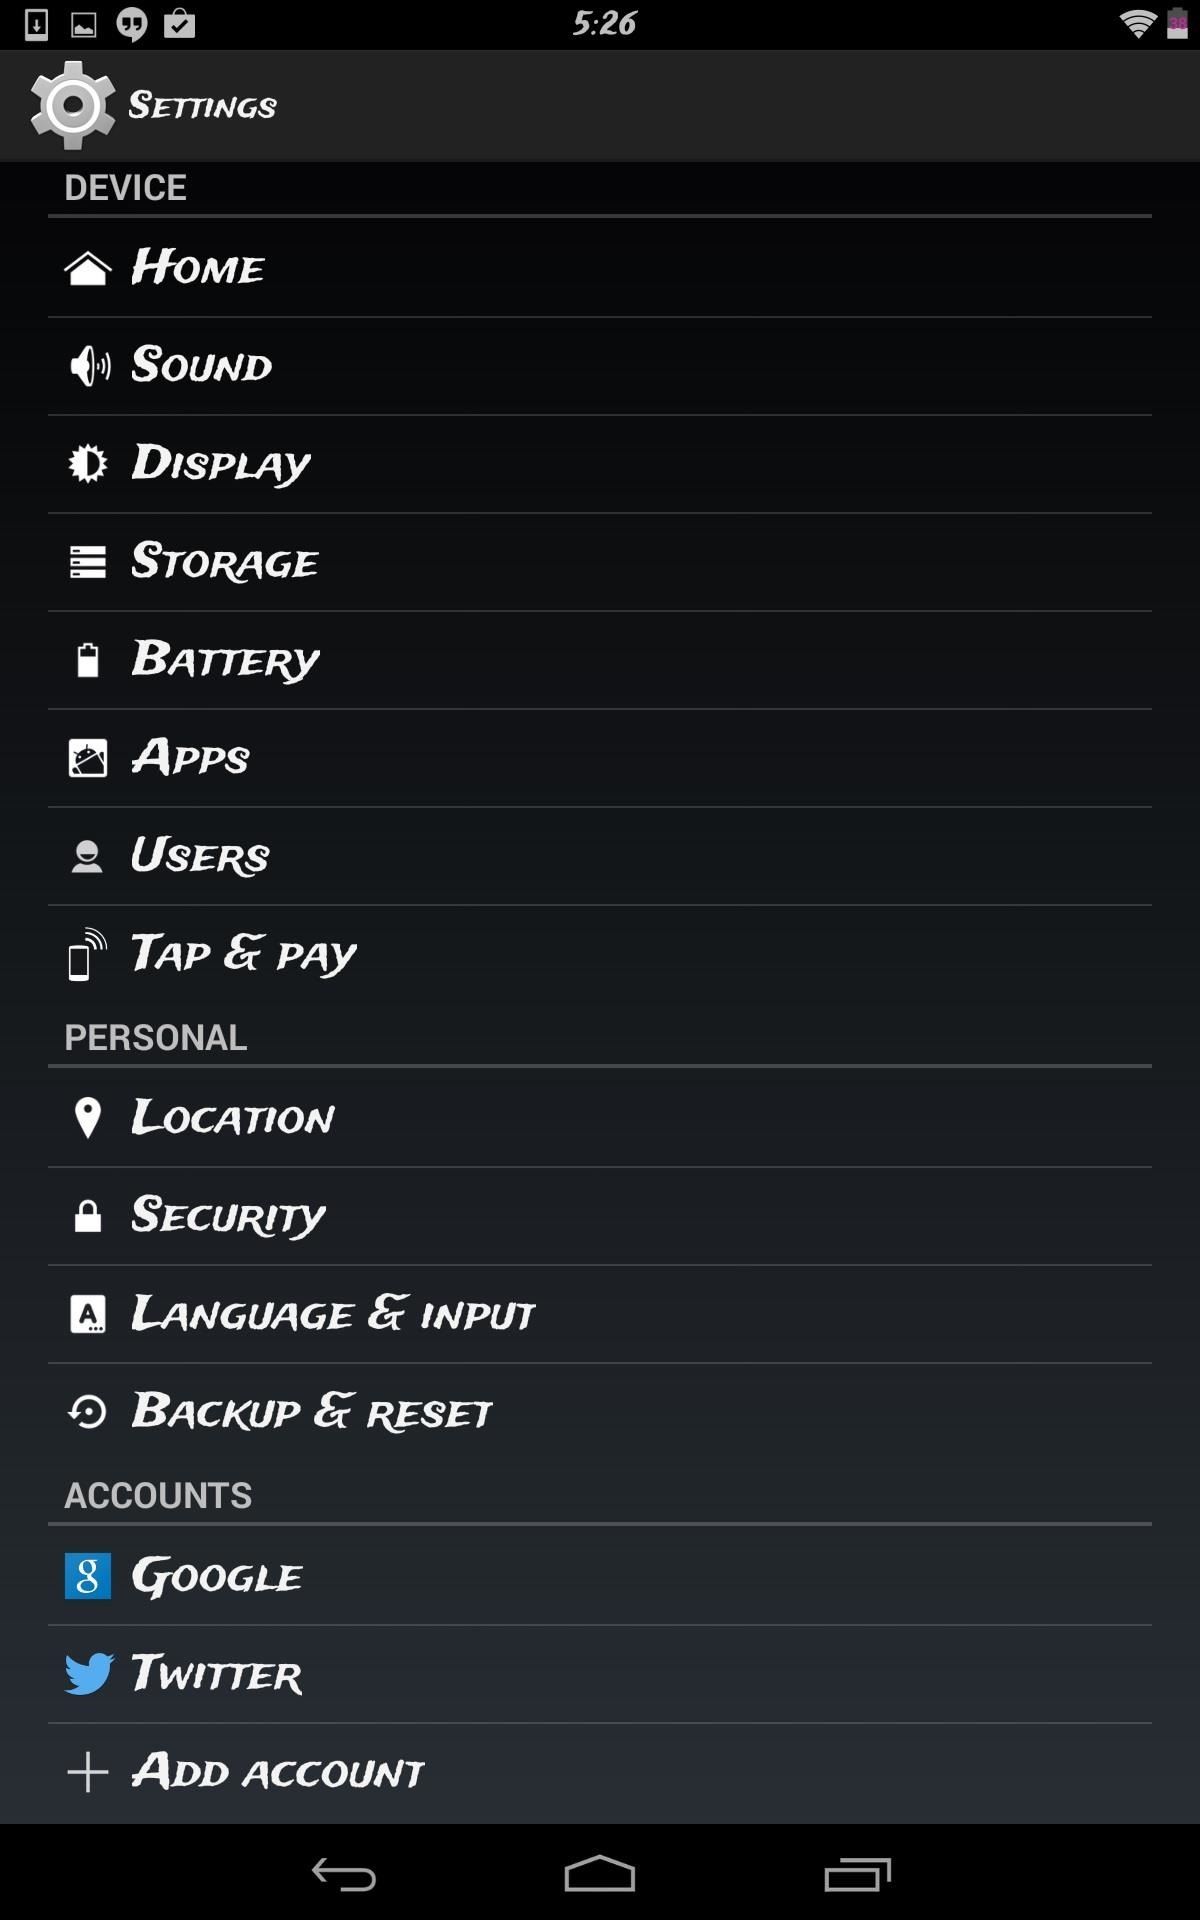 How to Set Custom Fonts for Apps, Settings, & More on Your Nexus 7 Tablet